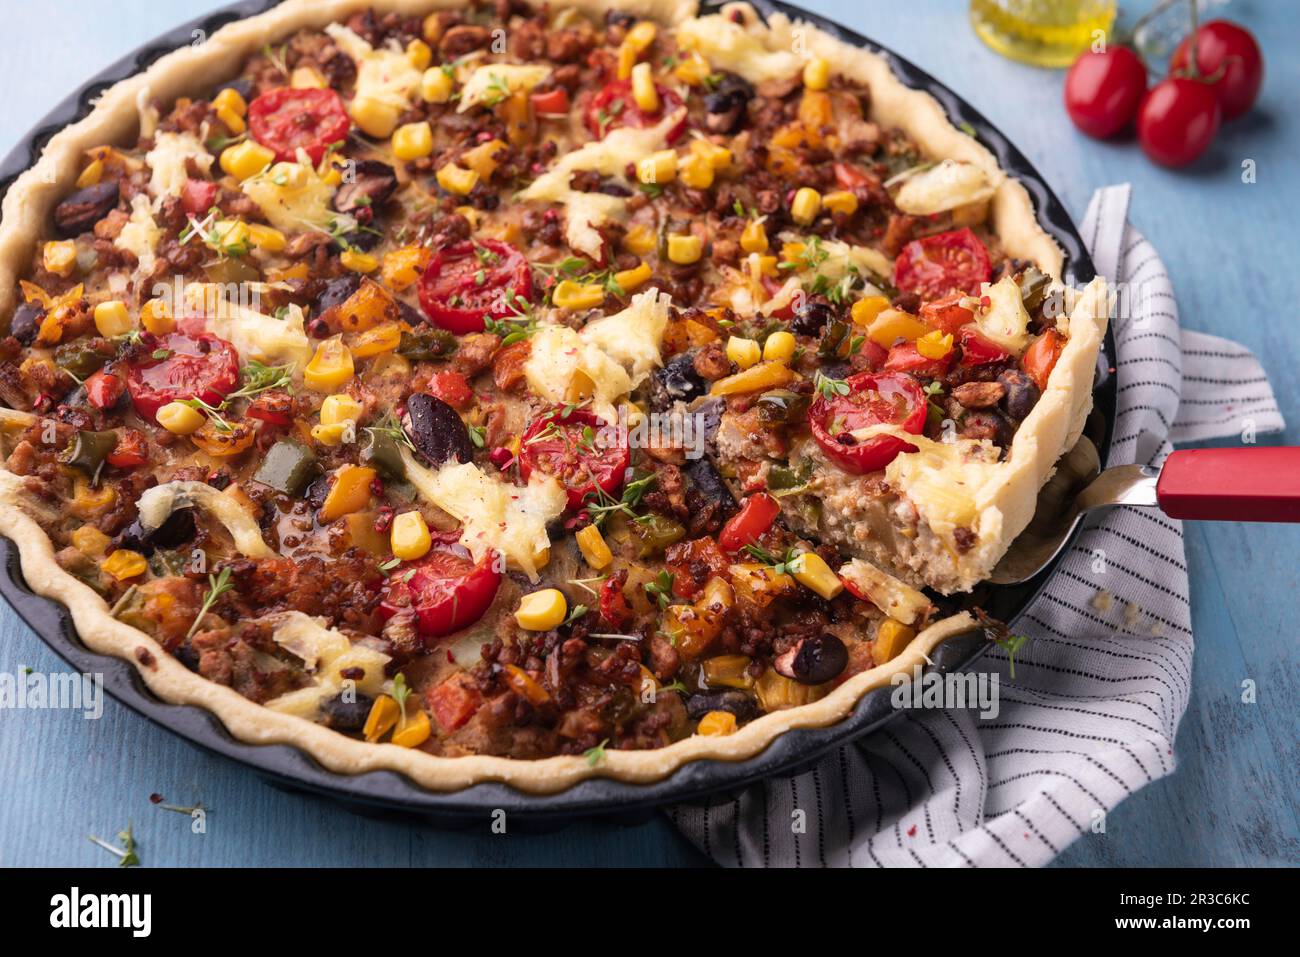 Vegan 'Mexican Style' quiche with soya mince, kidney beans and corn Stock Photo